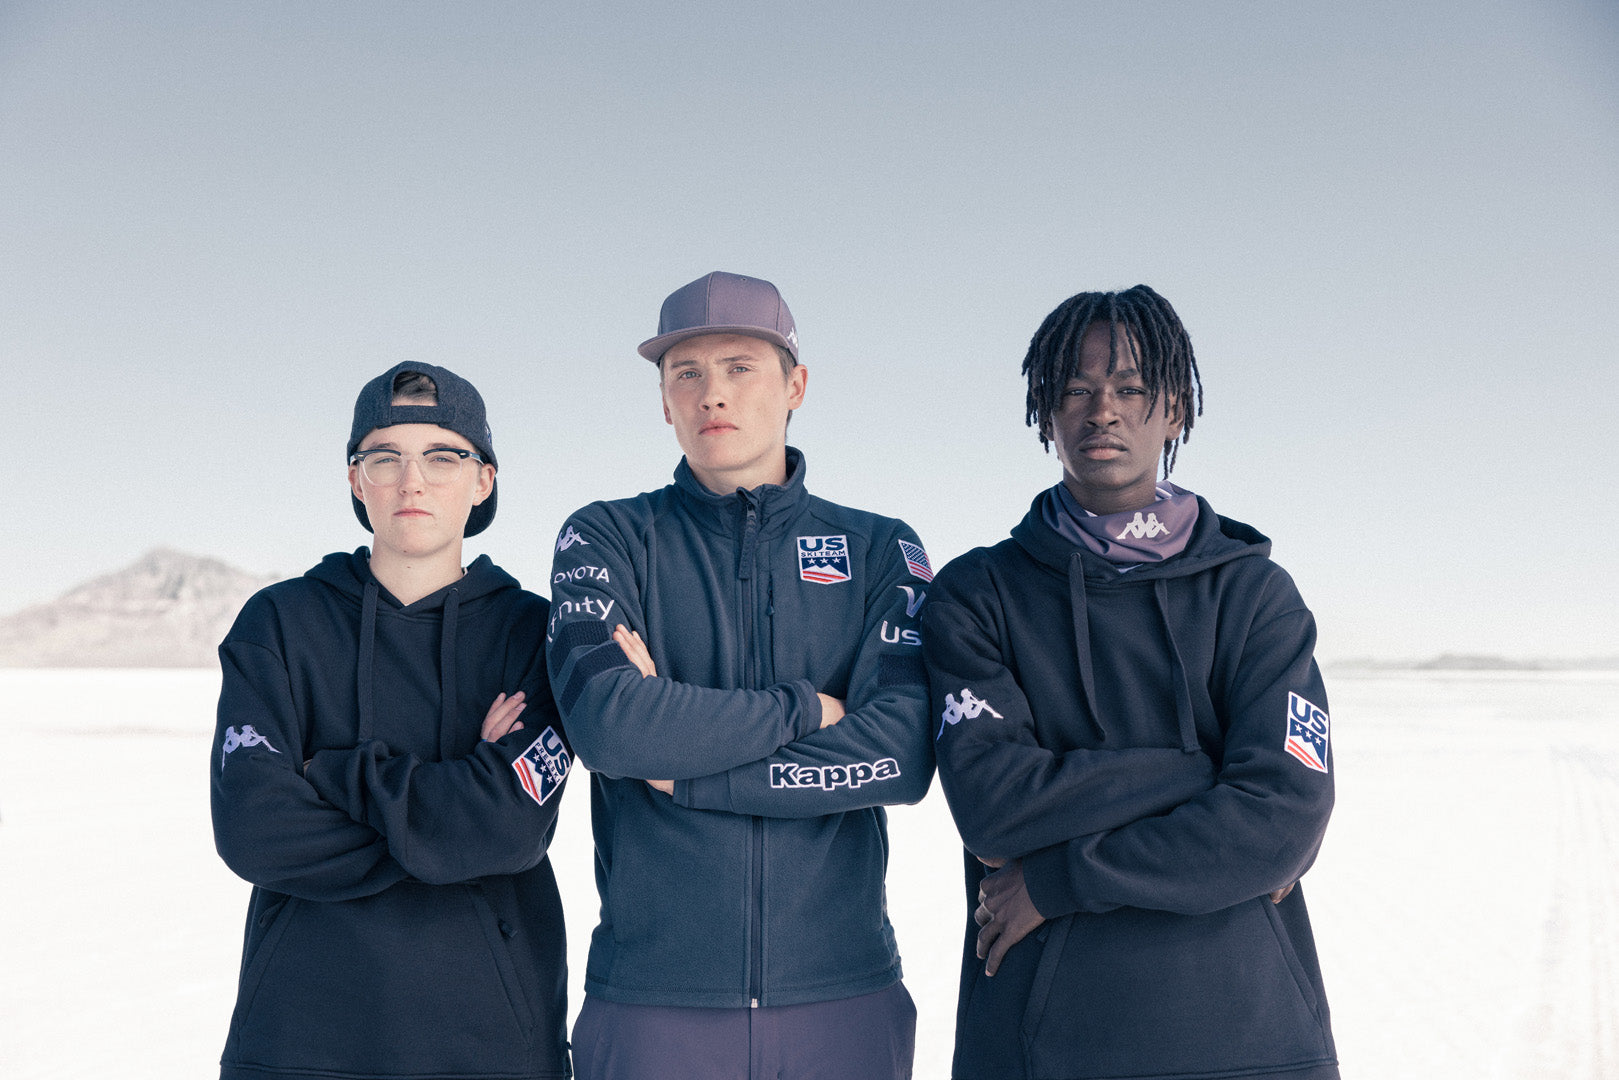 Group shot of three Male US athletes looking directly at camera in full Kappa X US apparel 